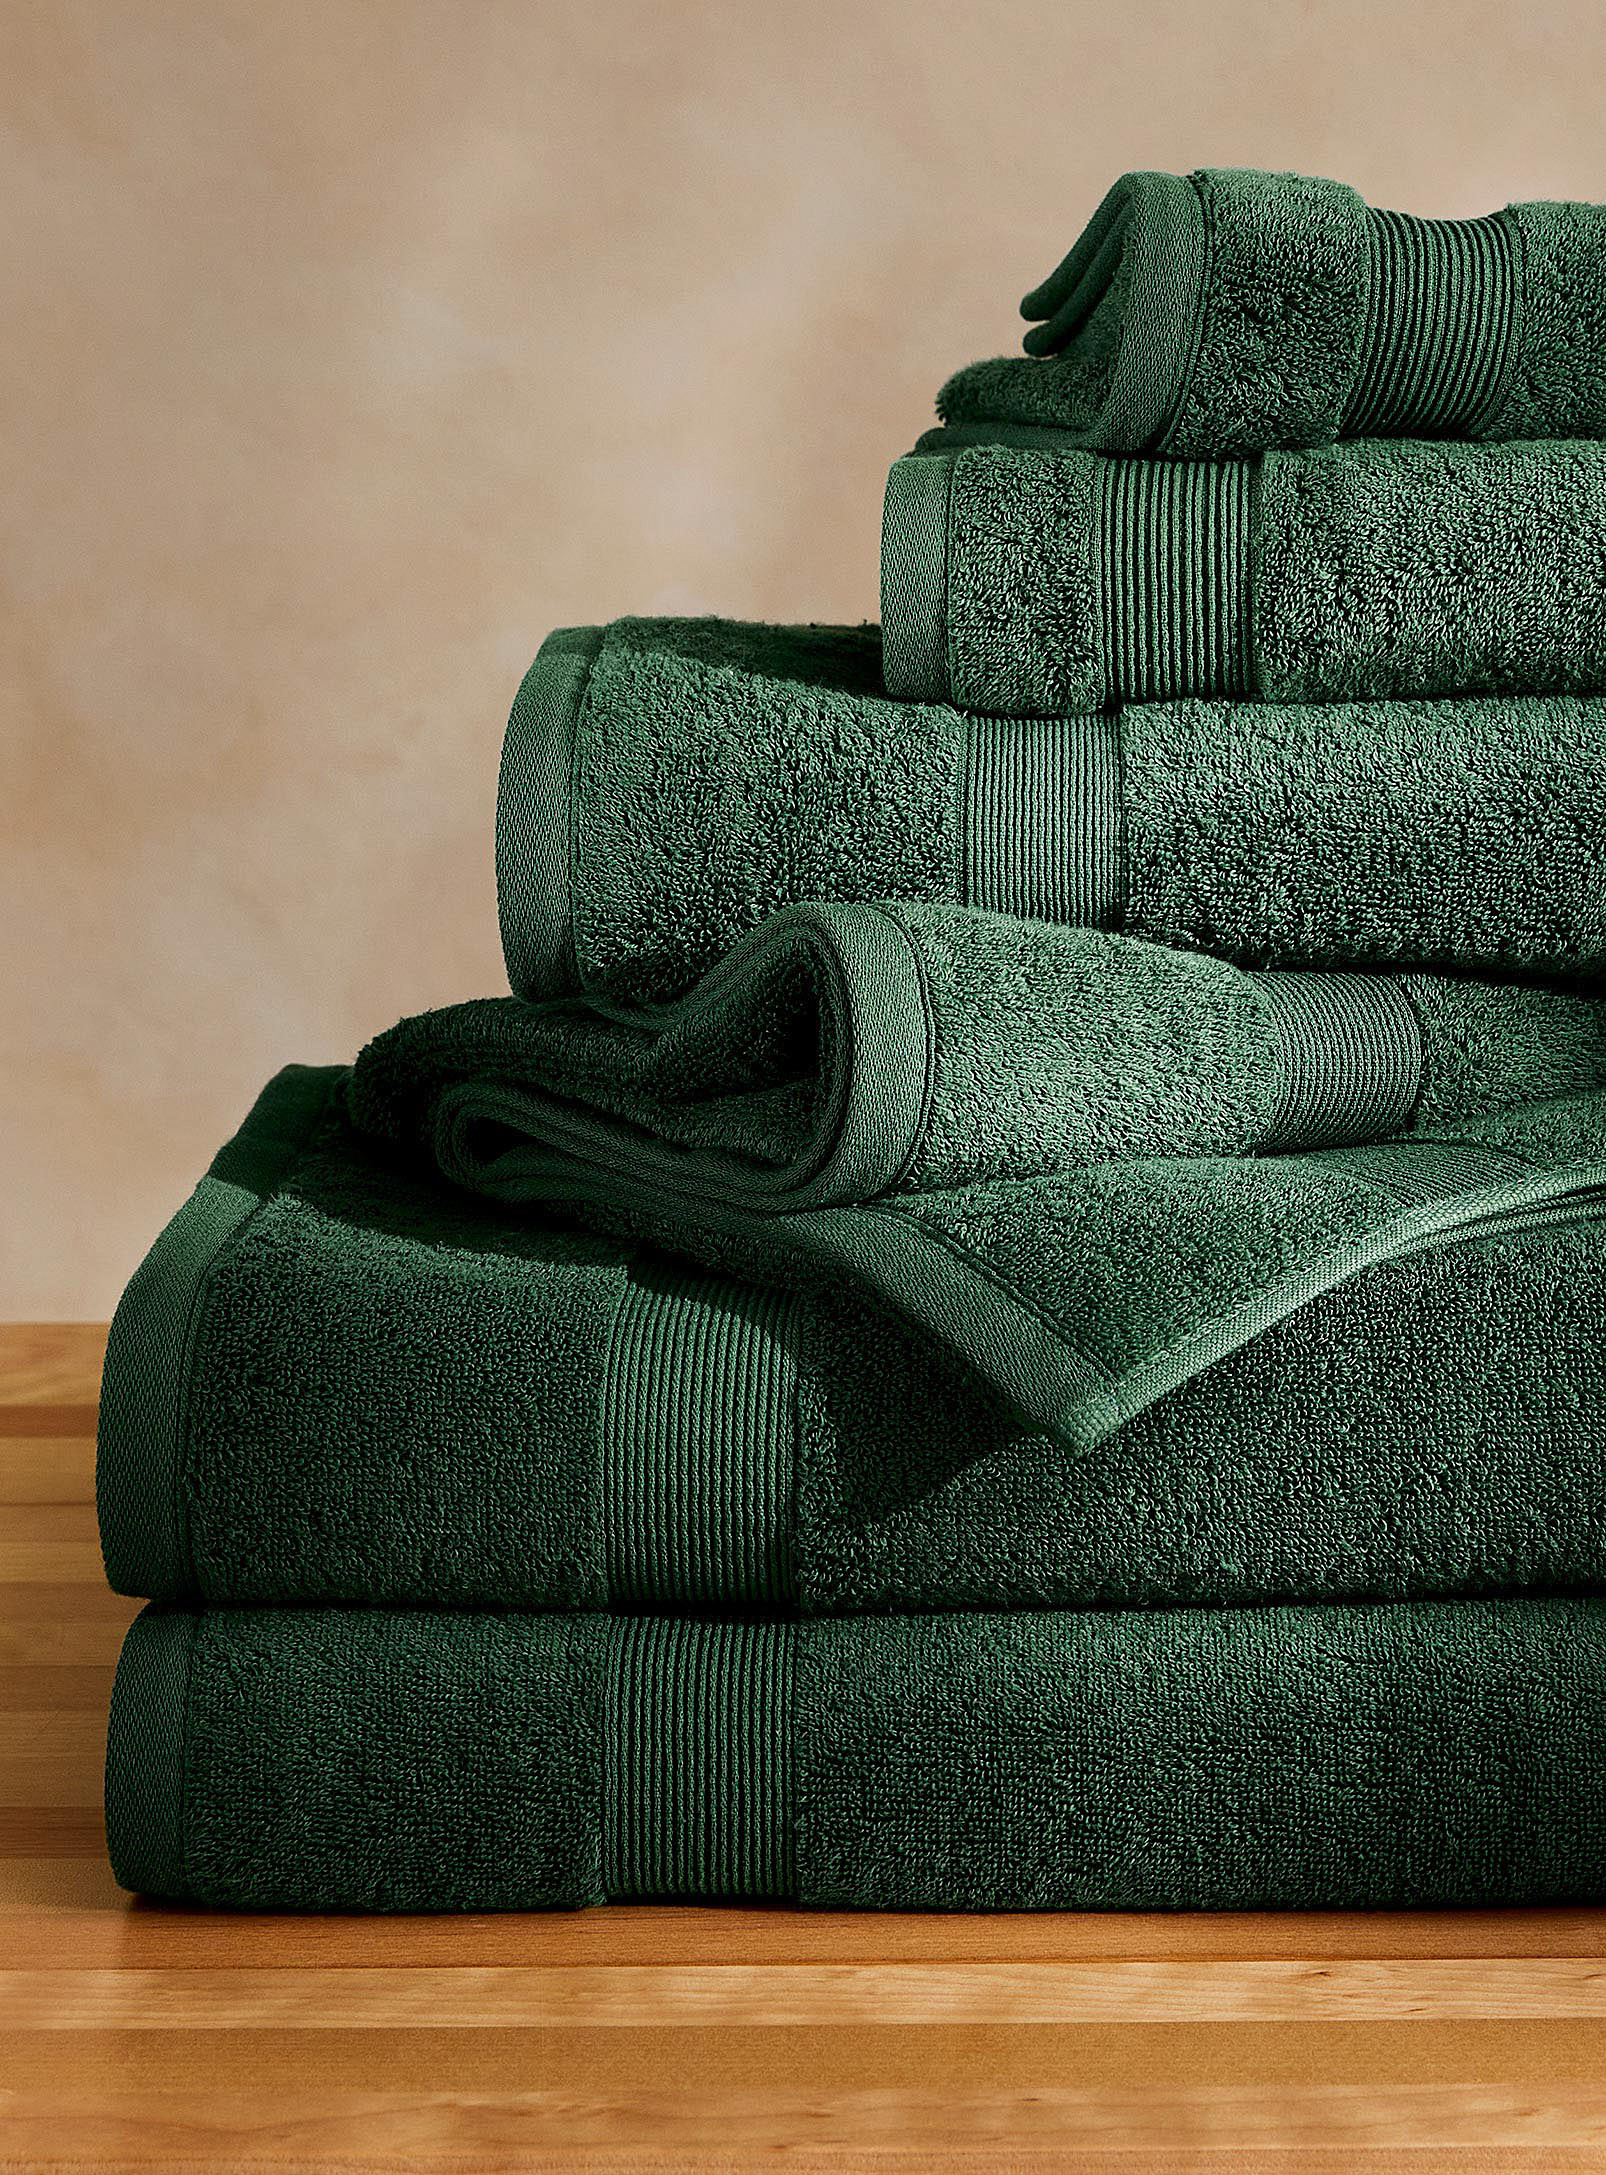 Simons Maison Grooved Border Turkish Cotton Towels In Mossy Green